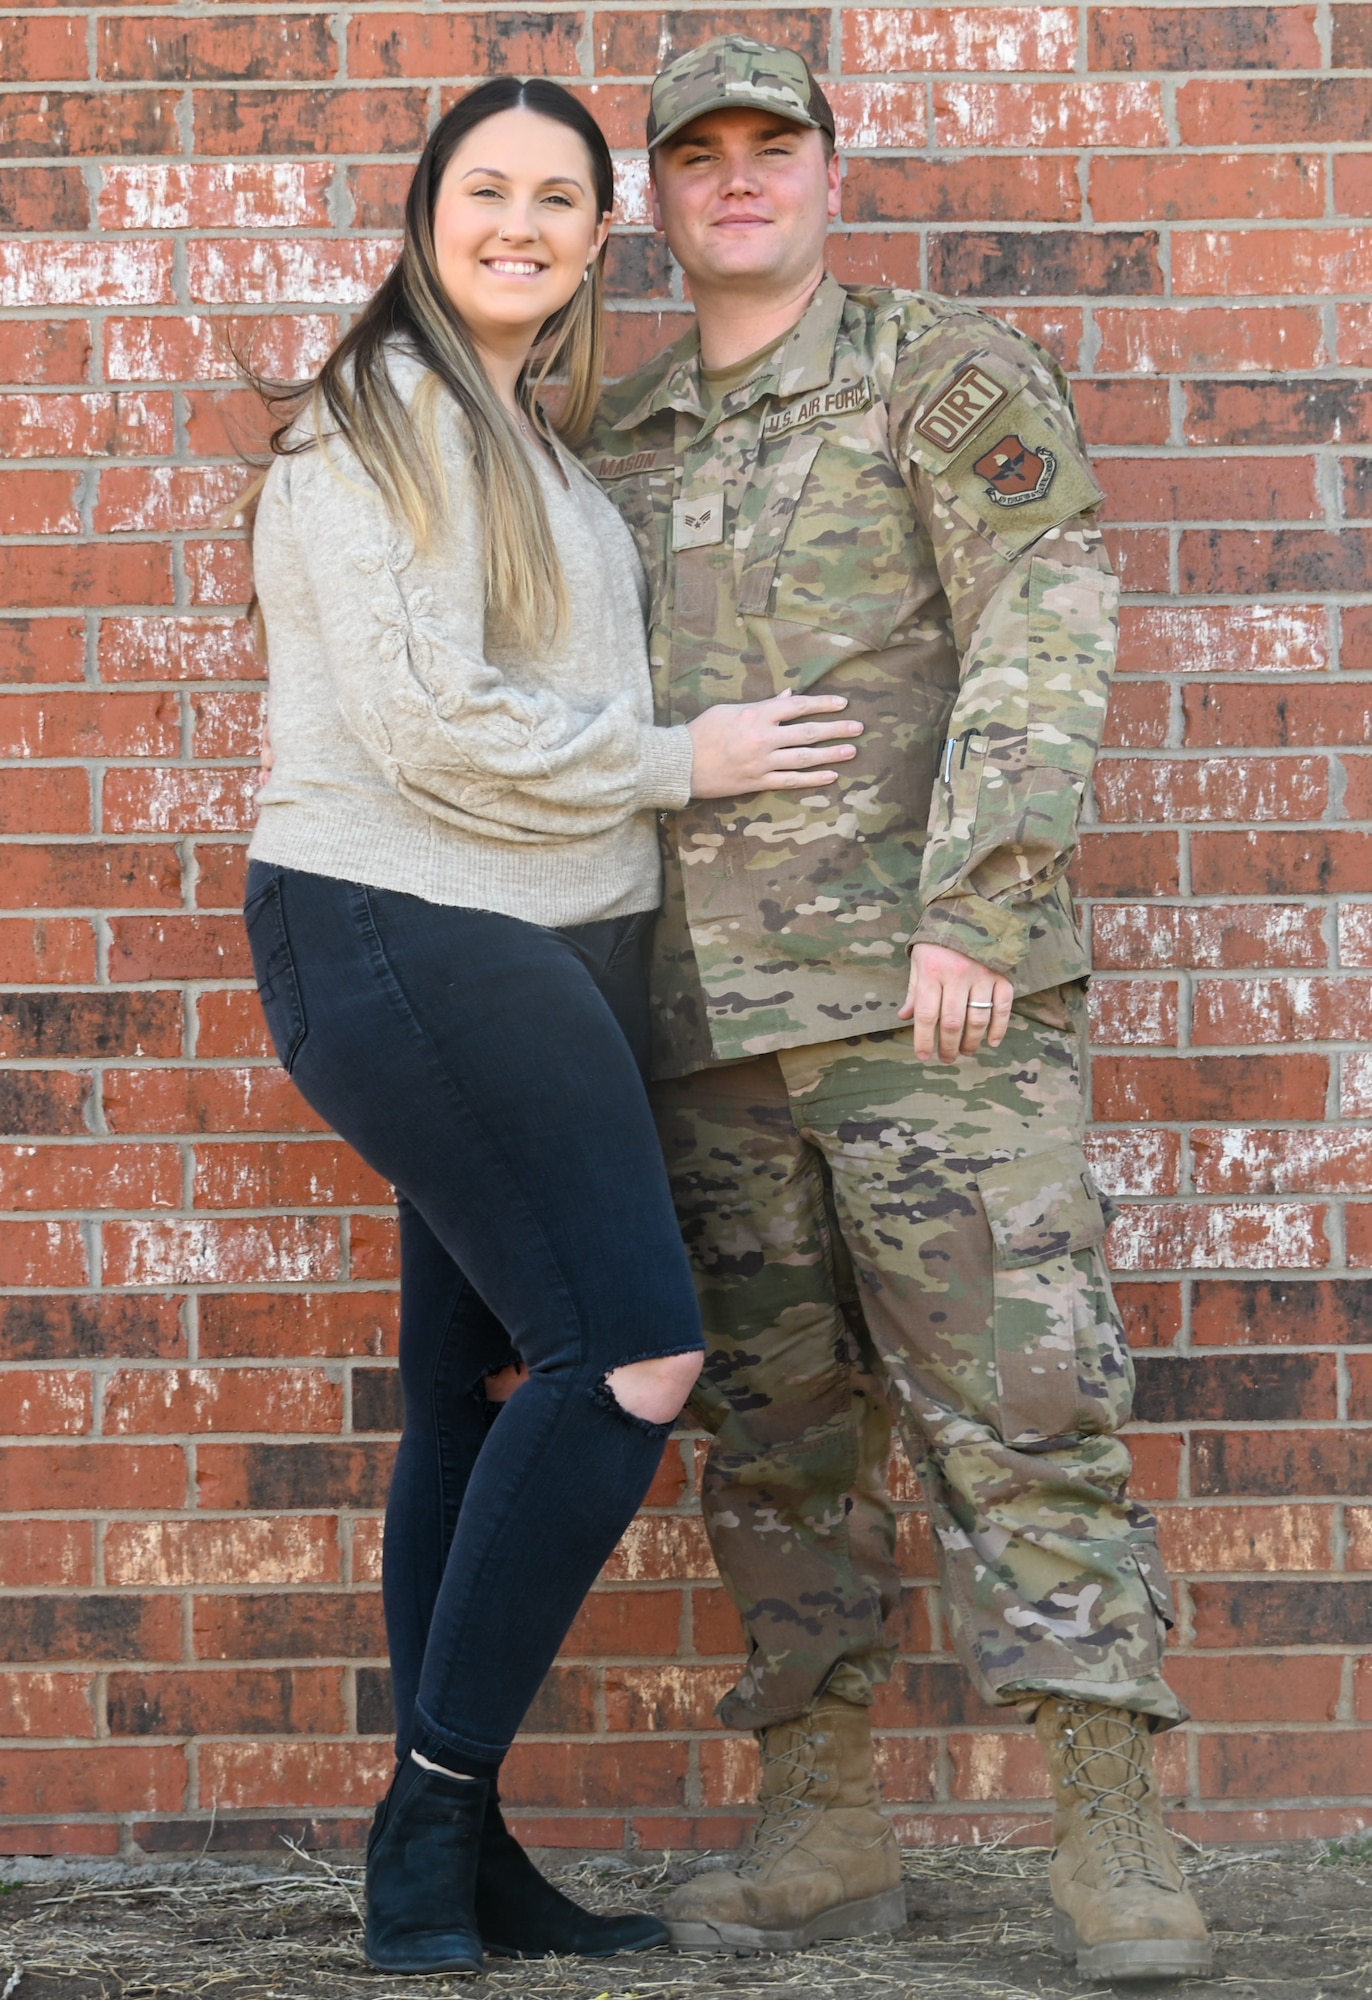 U.S. Air Force Senior Airman John Mason, 97th Civil Engineer Squadron pavement and equipment operator journeyman, and his wife, Sadiee, pose for a photo at Altus Air Force Base, Oklahoma, Feb. 15, 2023. Mason and Sadiee have been together for a year. (U.S. Air Force photo by Senior Airman Kayla Christenson)